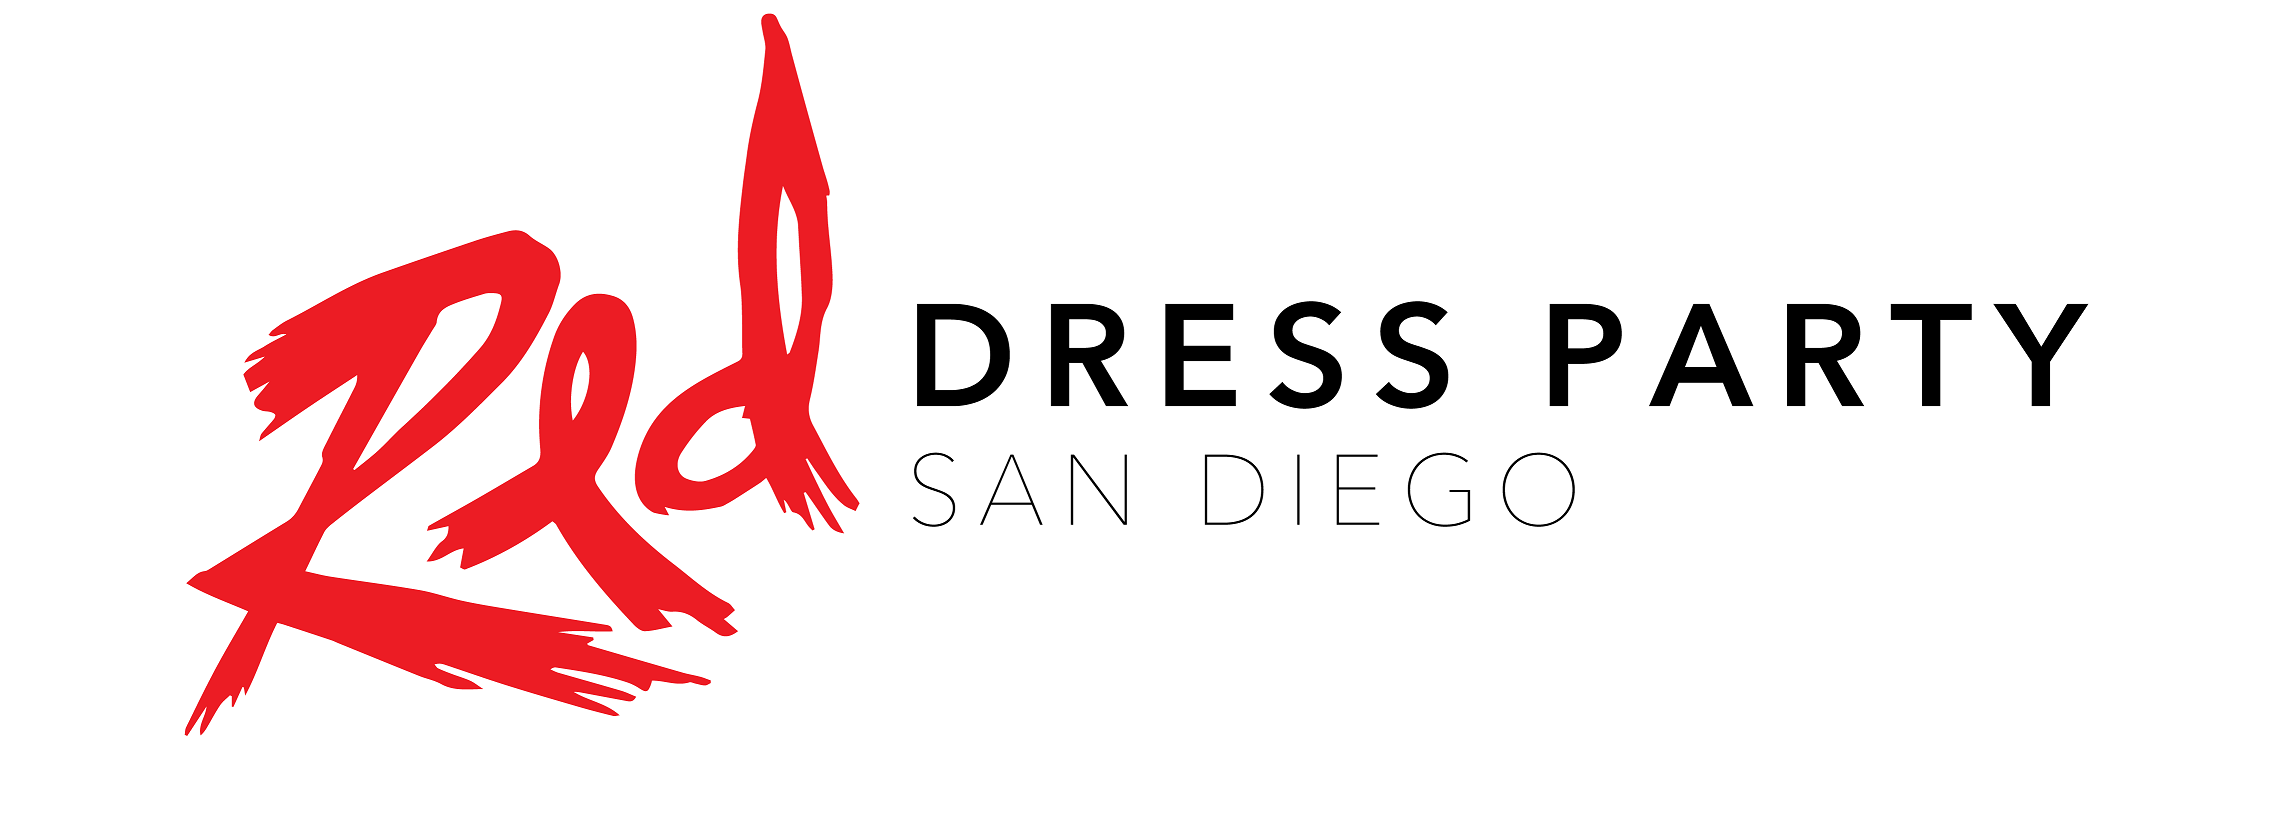 Red Dress Logo - About Red Dress Party SD - Red Dress Party San Diego